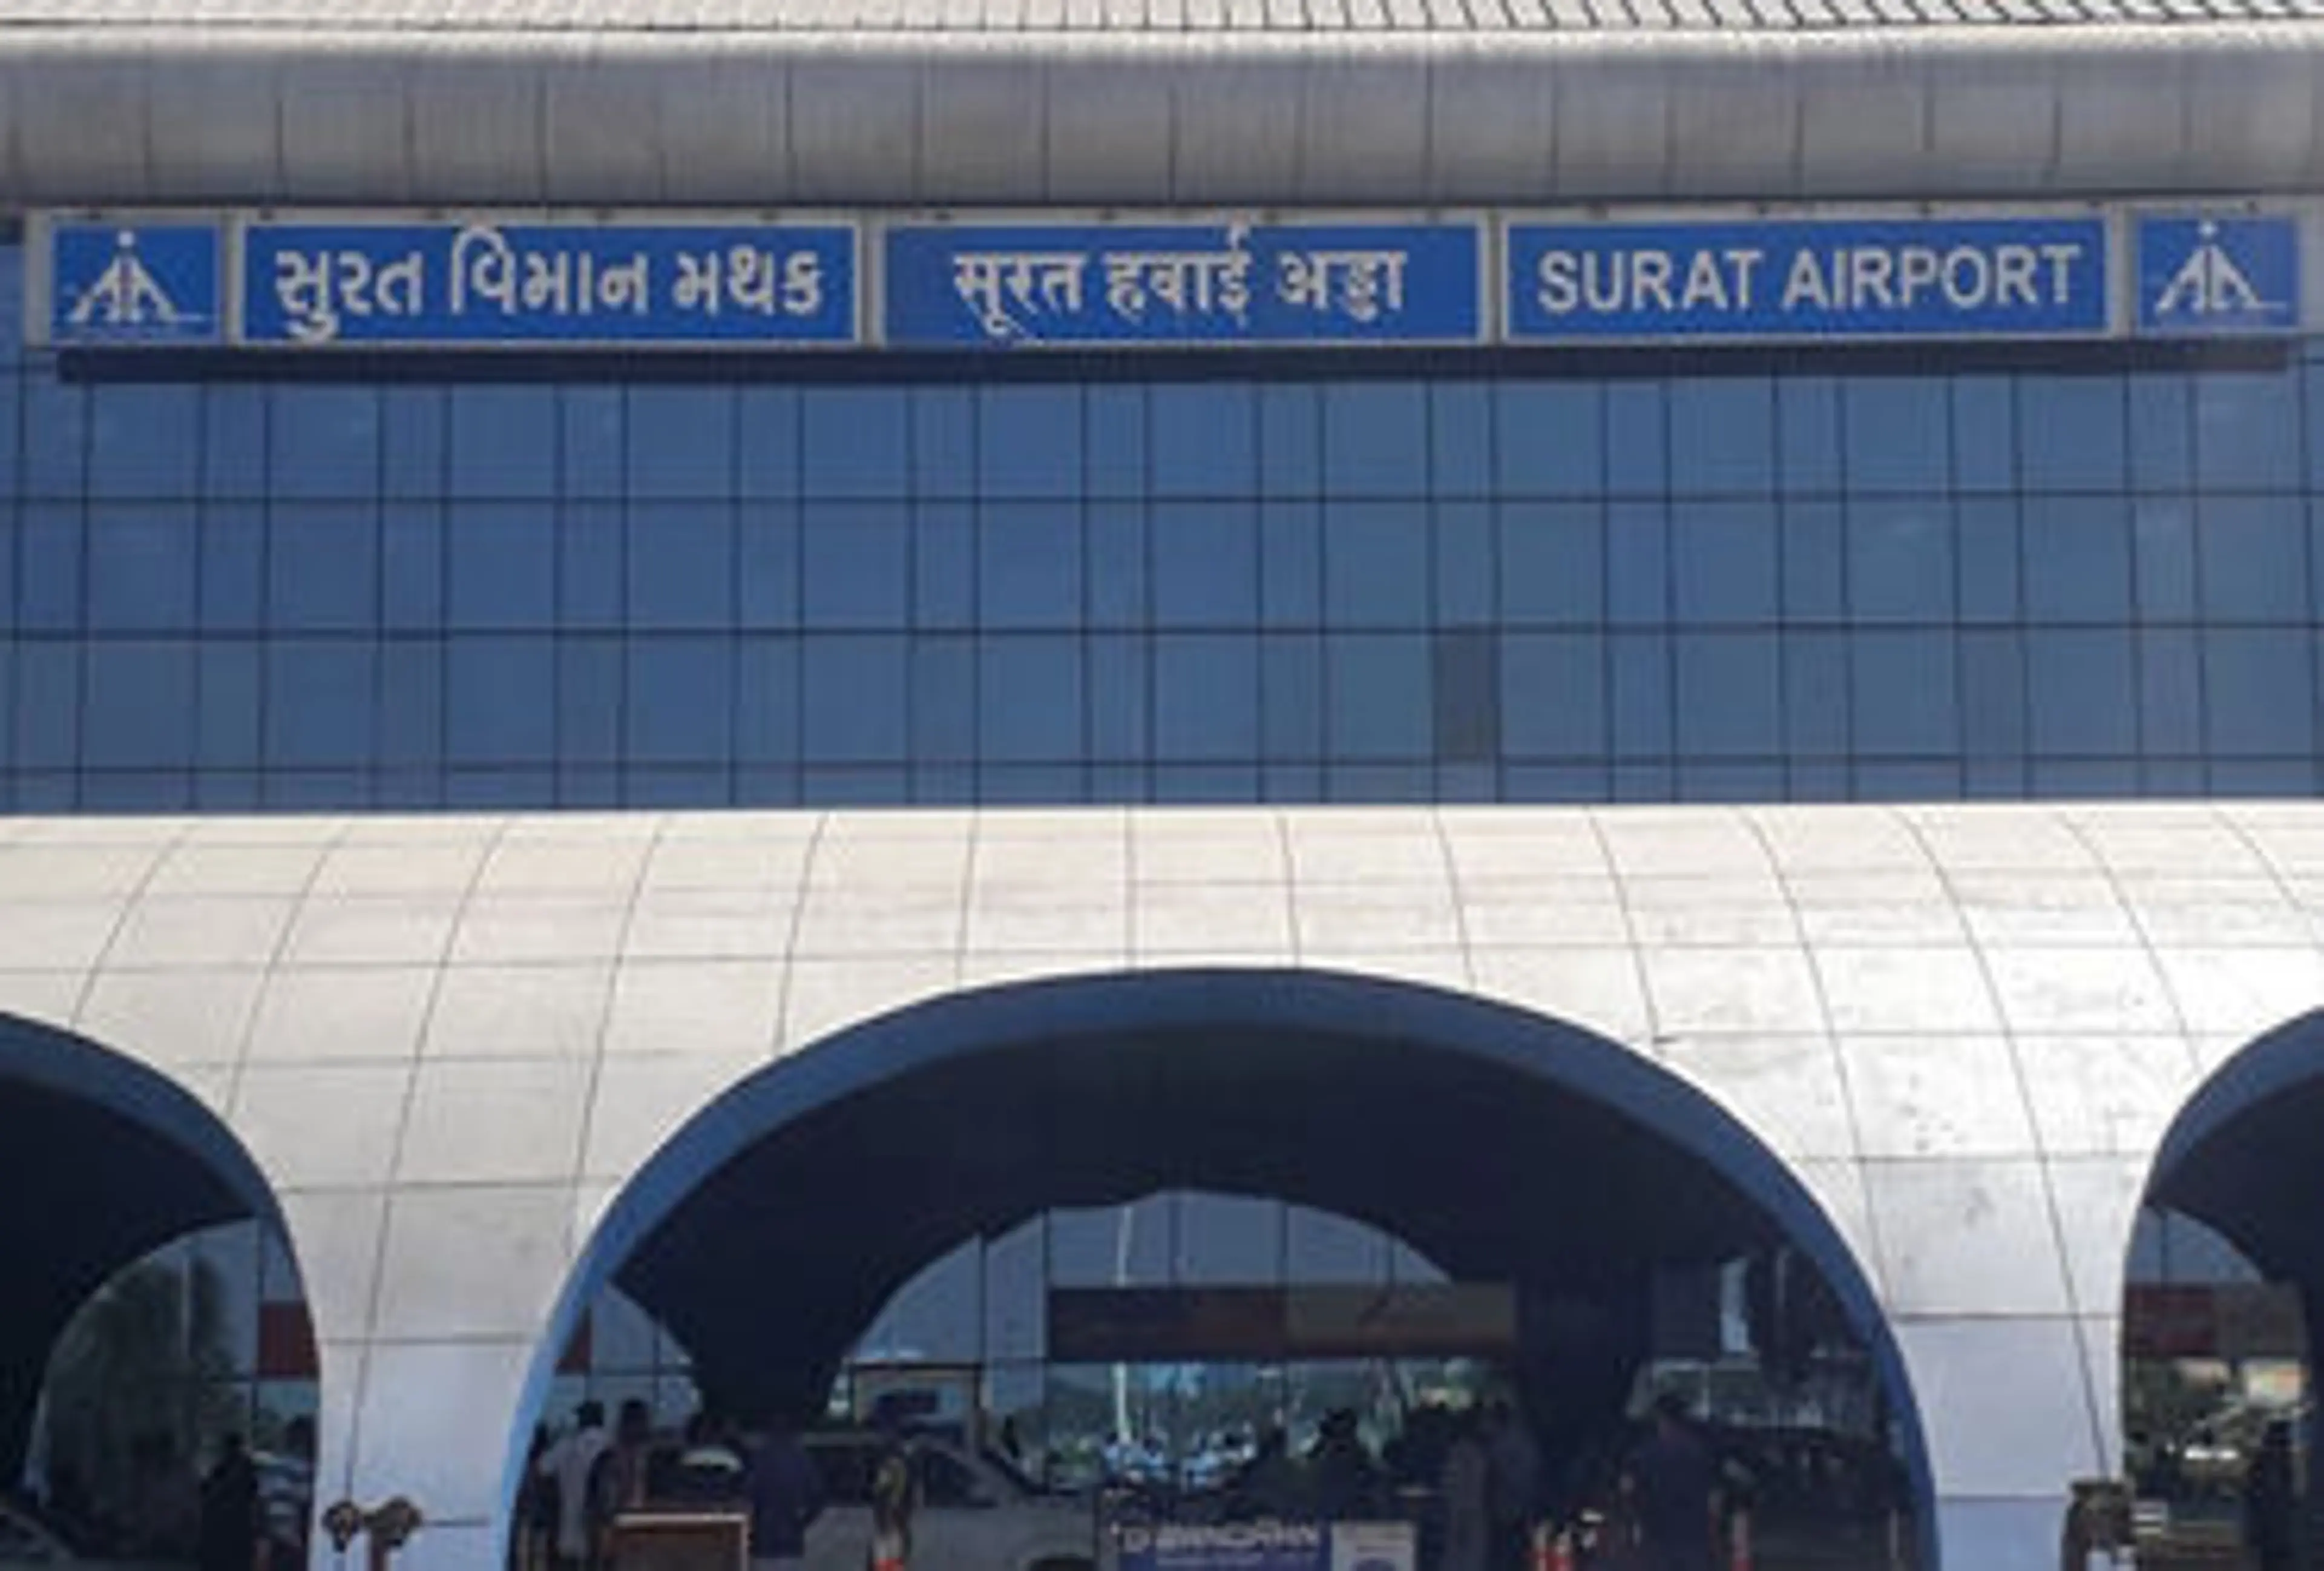 ₹10 cr gold seized from Surat airport, top officials’ involvement suspected